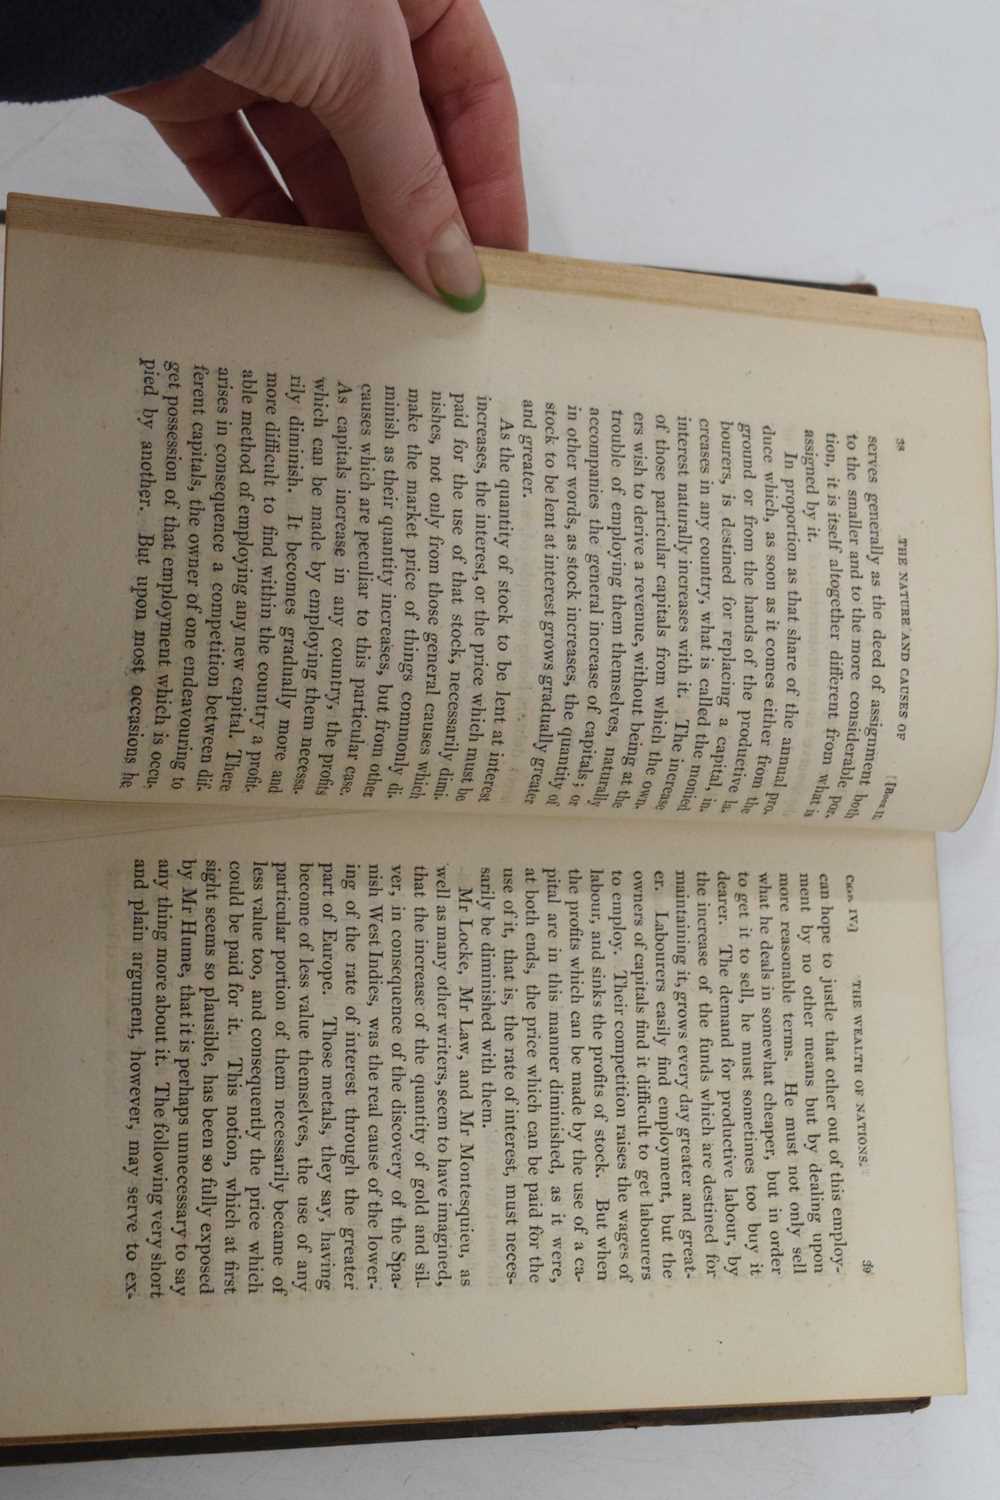 Early edition of The Wealth of Nations, Adam Smith - Image 9 of 9